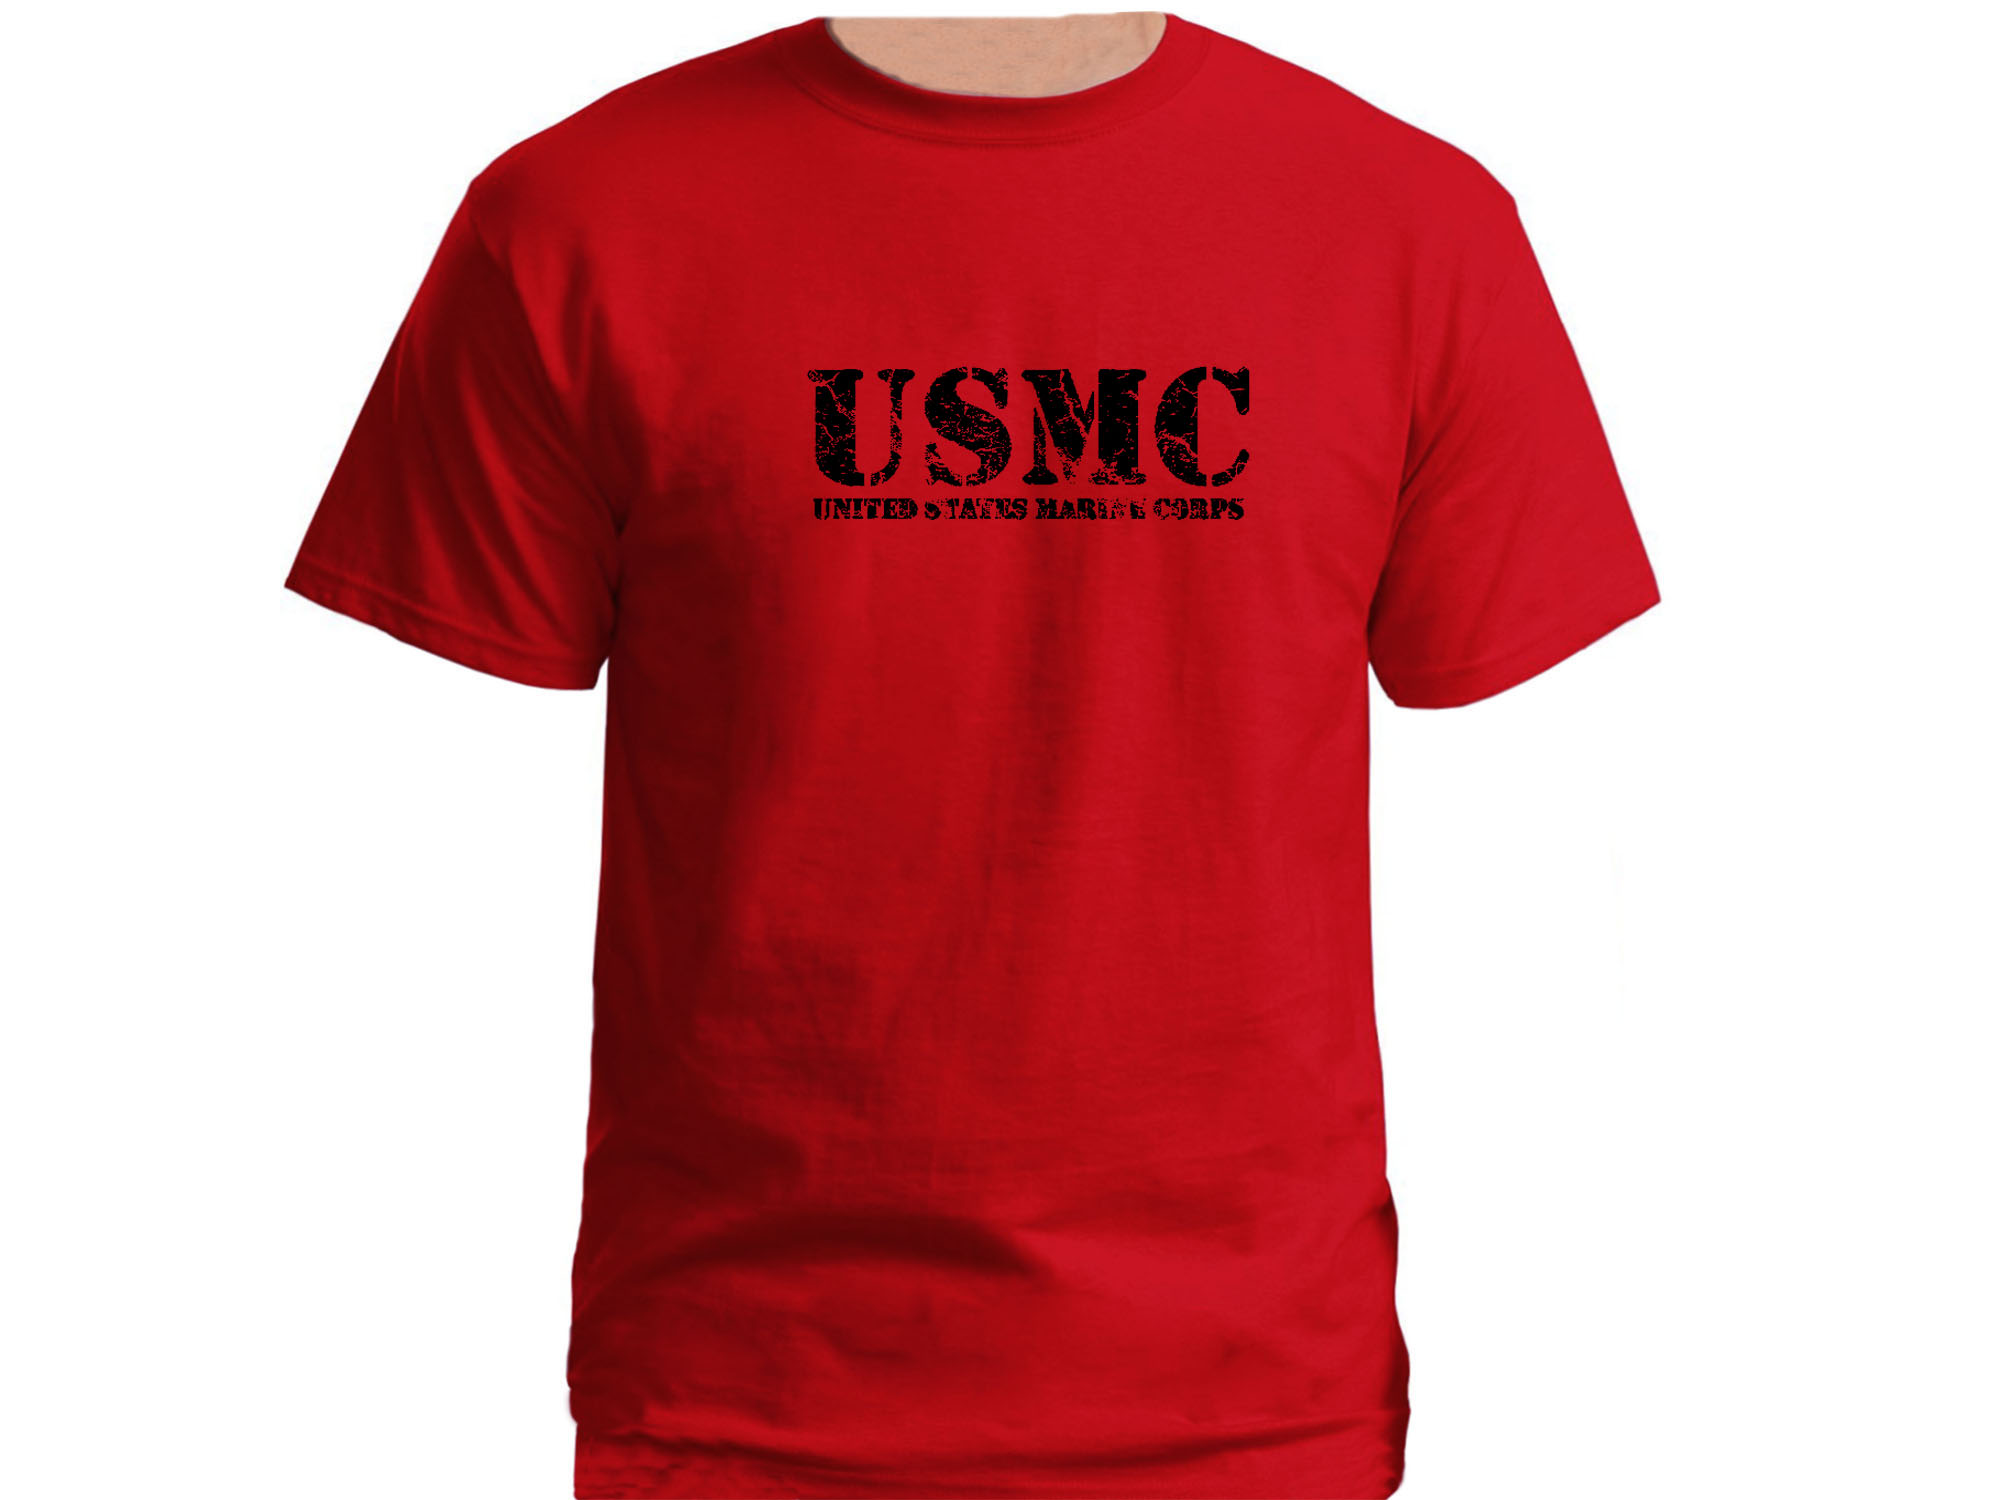 US army marine corps USMC distressed look red t-shirt